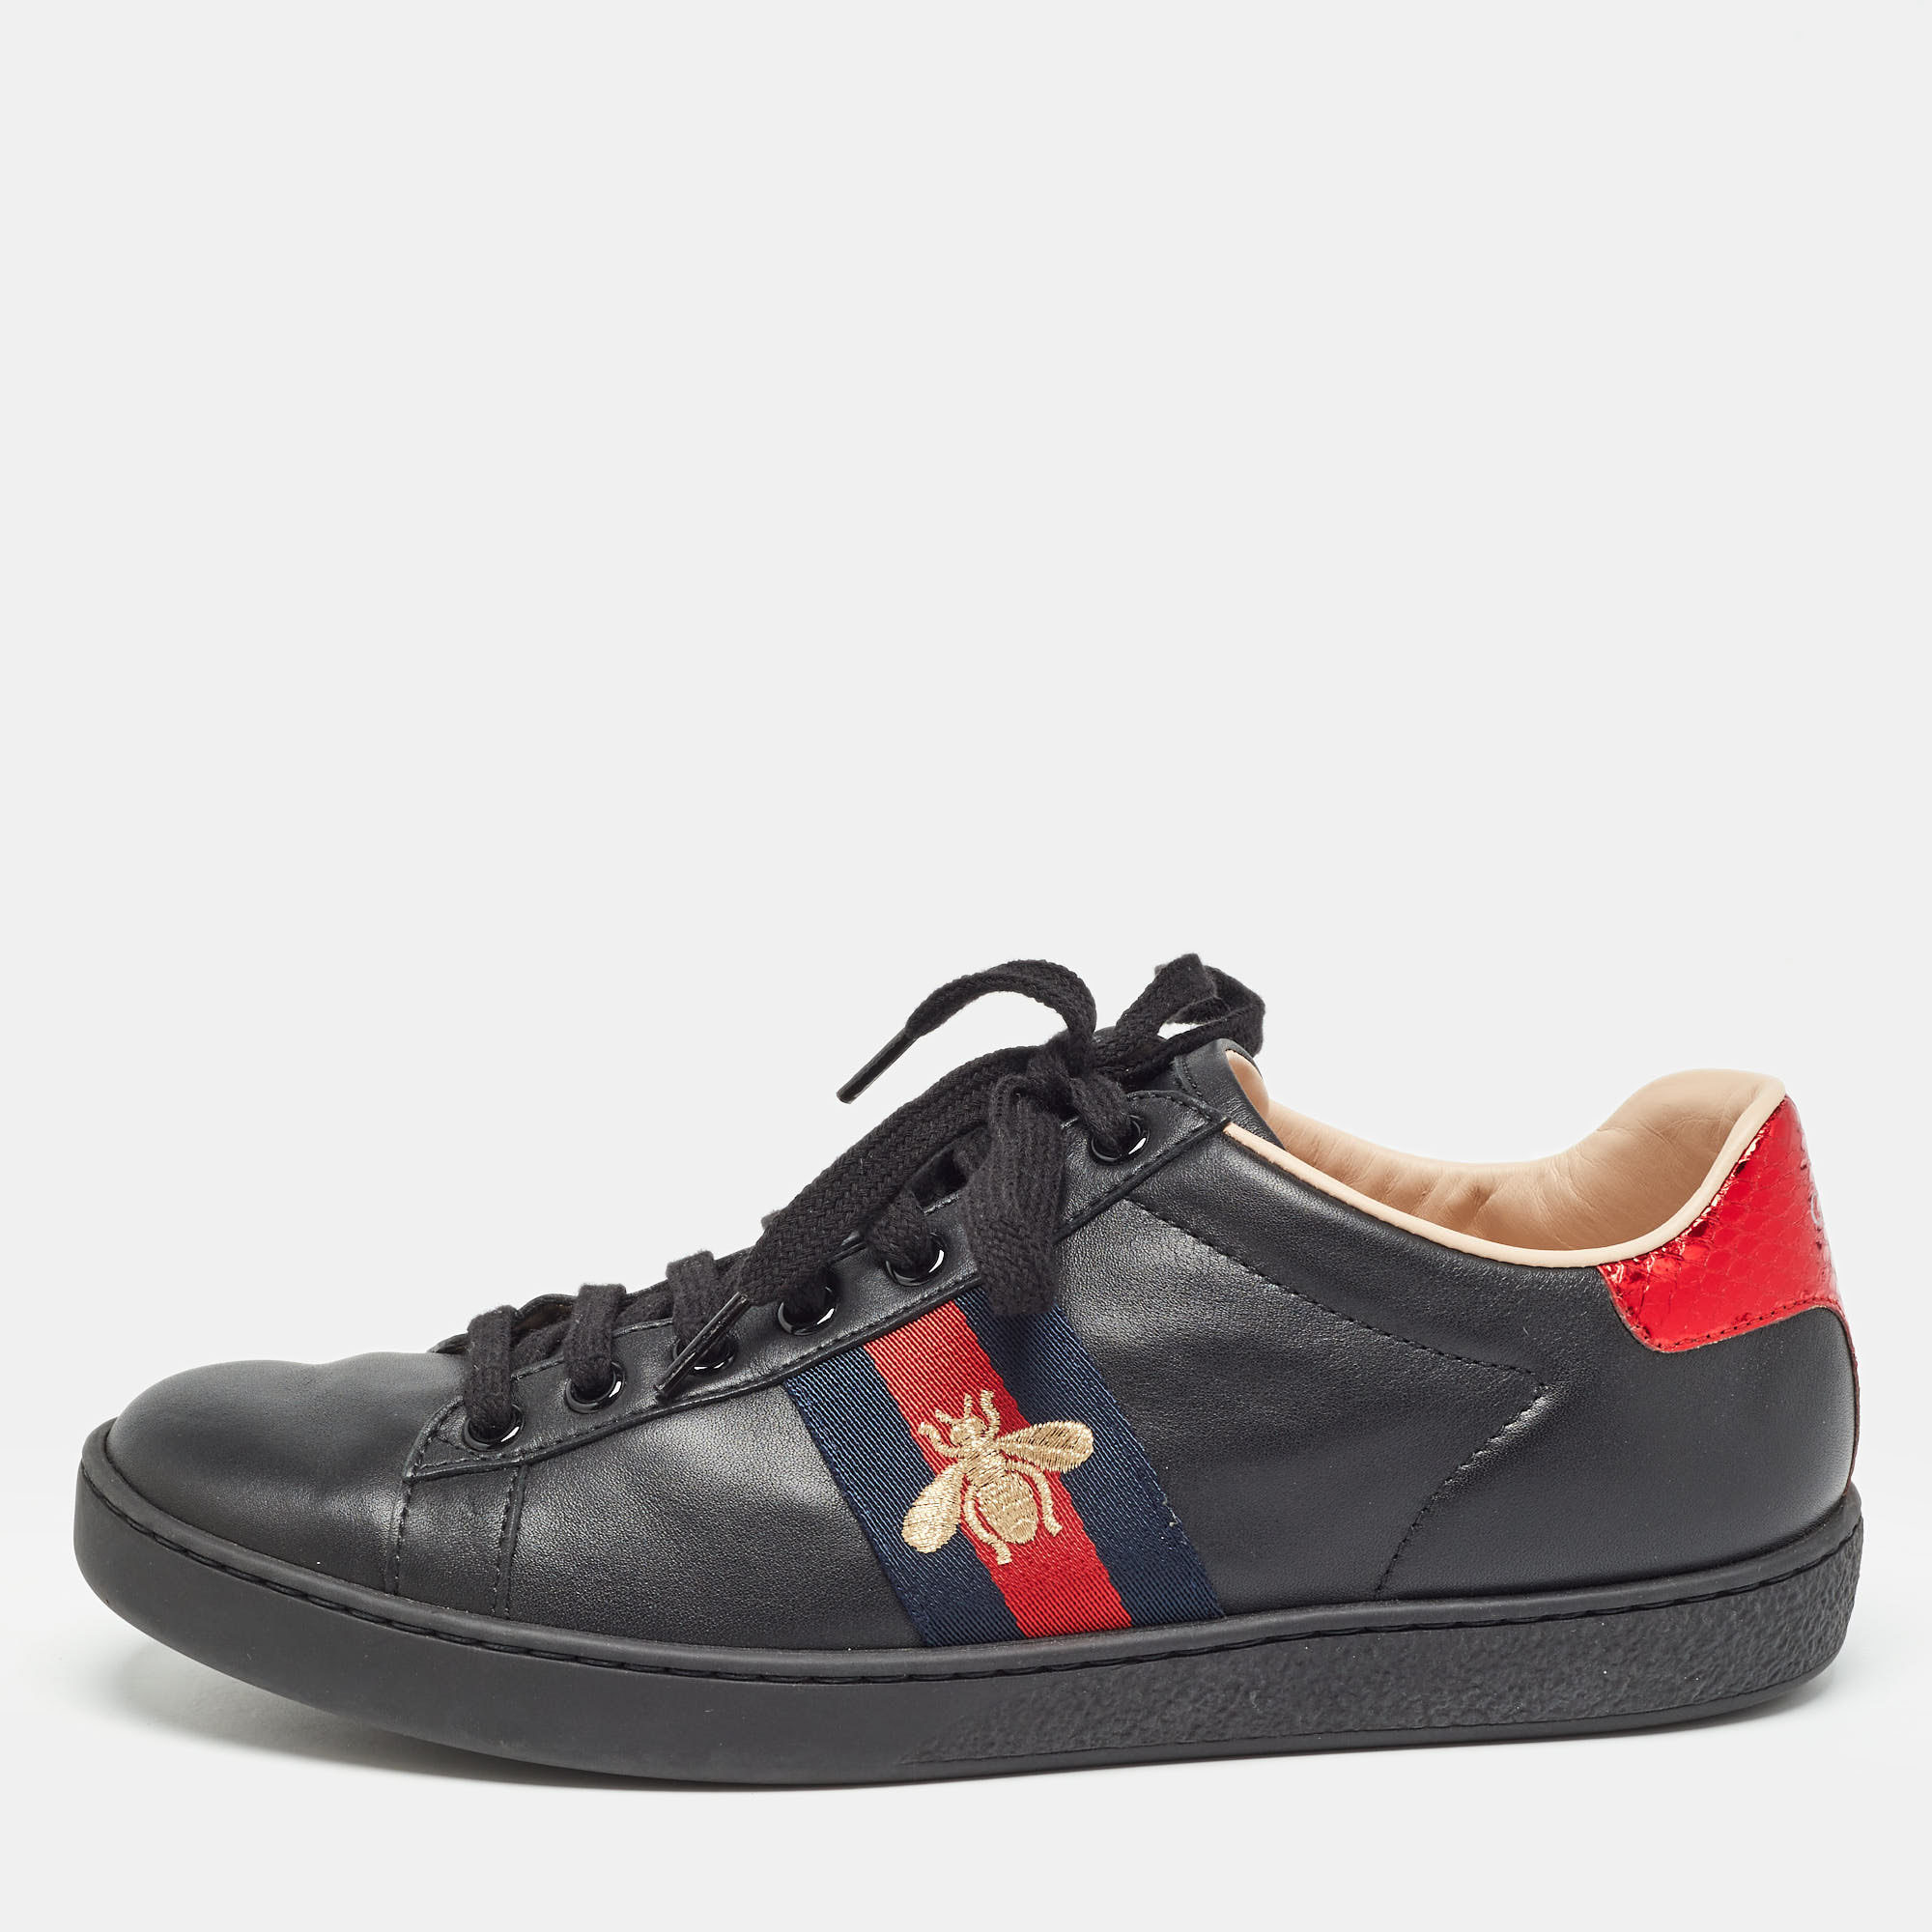 Gucci black leather embroidered bee ace sneakers size 38